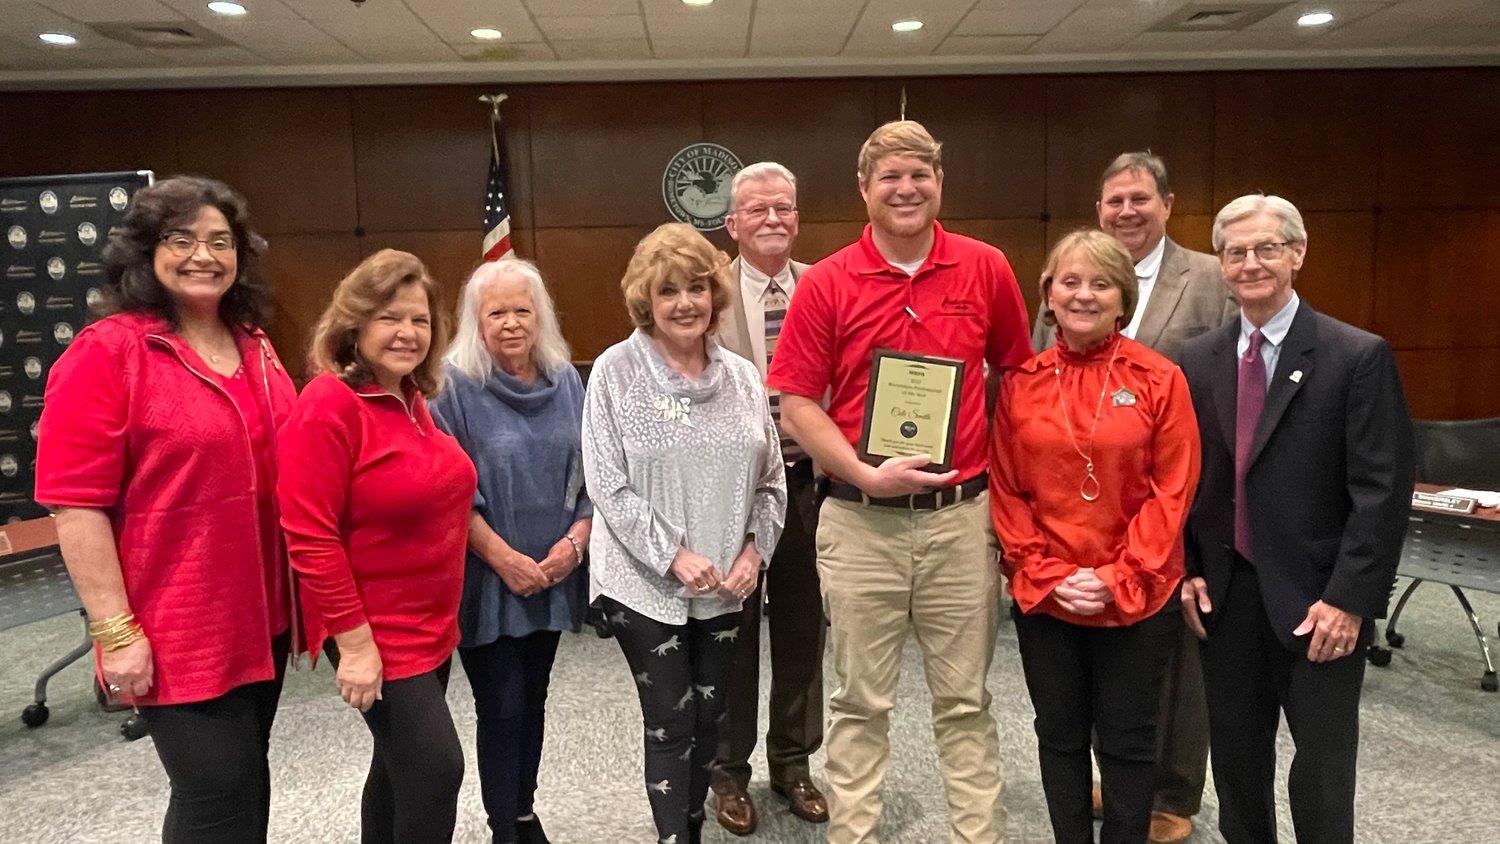 City official Cole Smith received the 2022 MRPA Recreation Professional of the Year Award Tuesday night from the City of Madison. He is also the incoming president of the MRPA, and will be sworn in as president in October 2023. Pictured, from left: Alderman-at-Large Sandra Strain, Alderman Pat Peeler, Alderman Tawanna Tatum, Mayor Mary-Hawkins Butler, Alderman Paul Tankersley, Incoming MRPA President Cole Smith, Alderman Janie Jarvis, Alderman Mike Hudgins, and Alderman Guy Bowering.